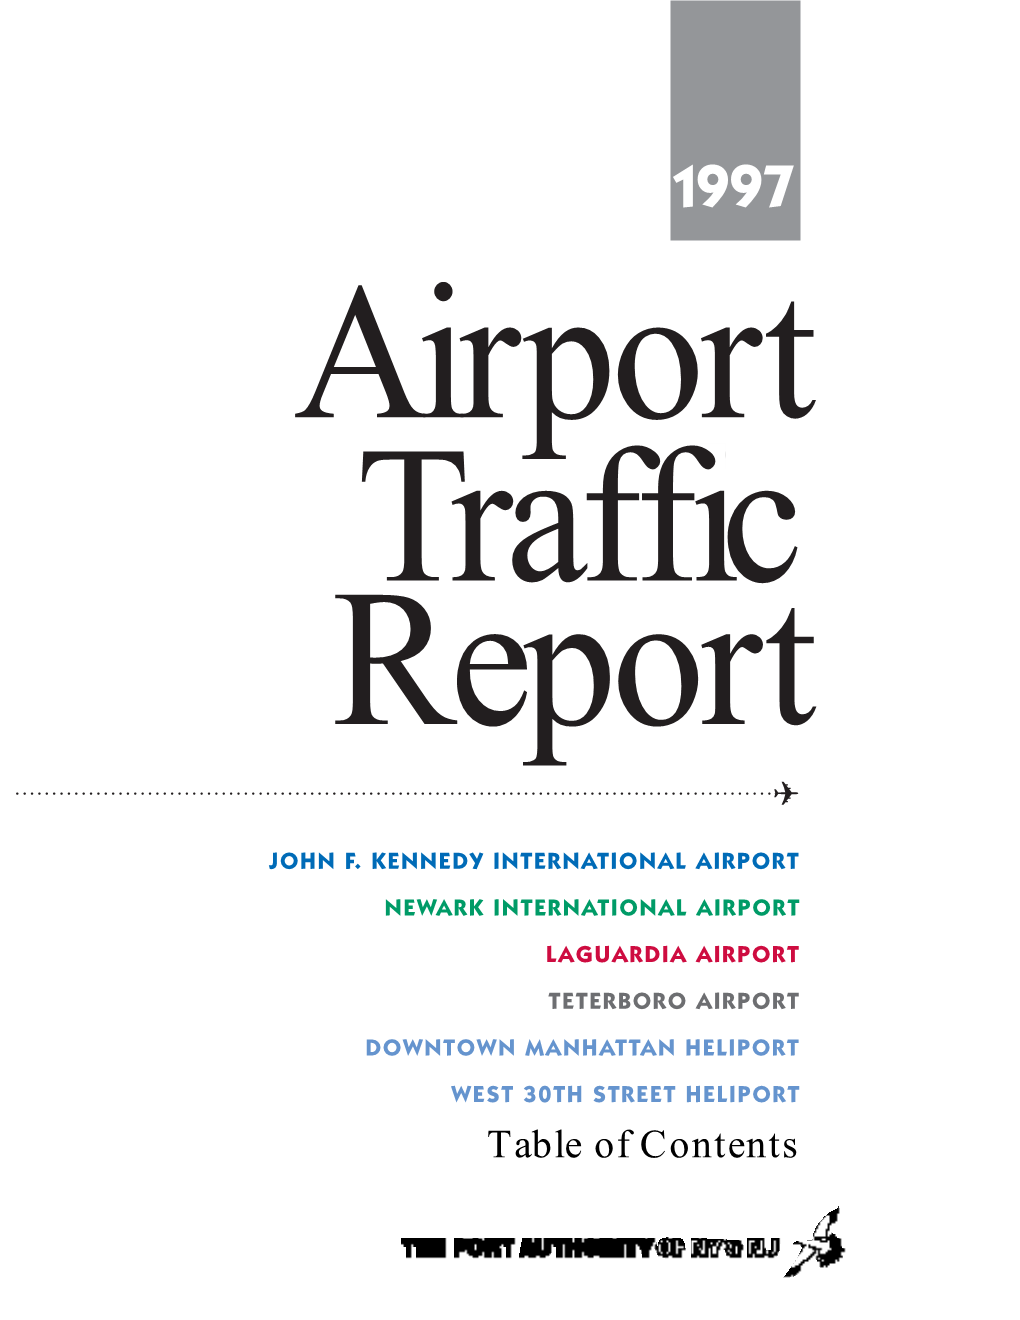 Passenger Traffic by Airline 2.5.1 Top 10 Carriers, 1997 Passengers, by Airport and Region